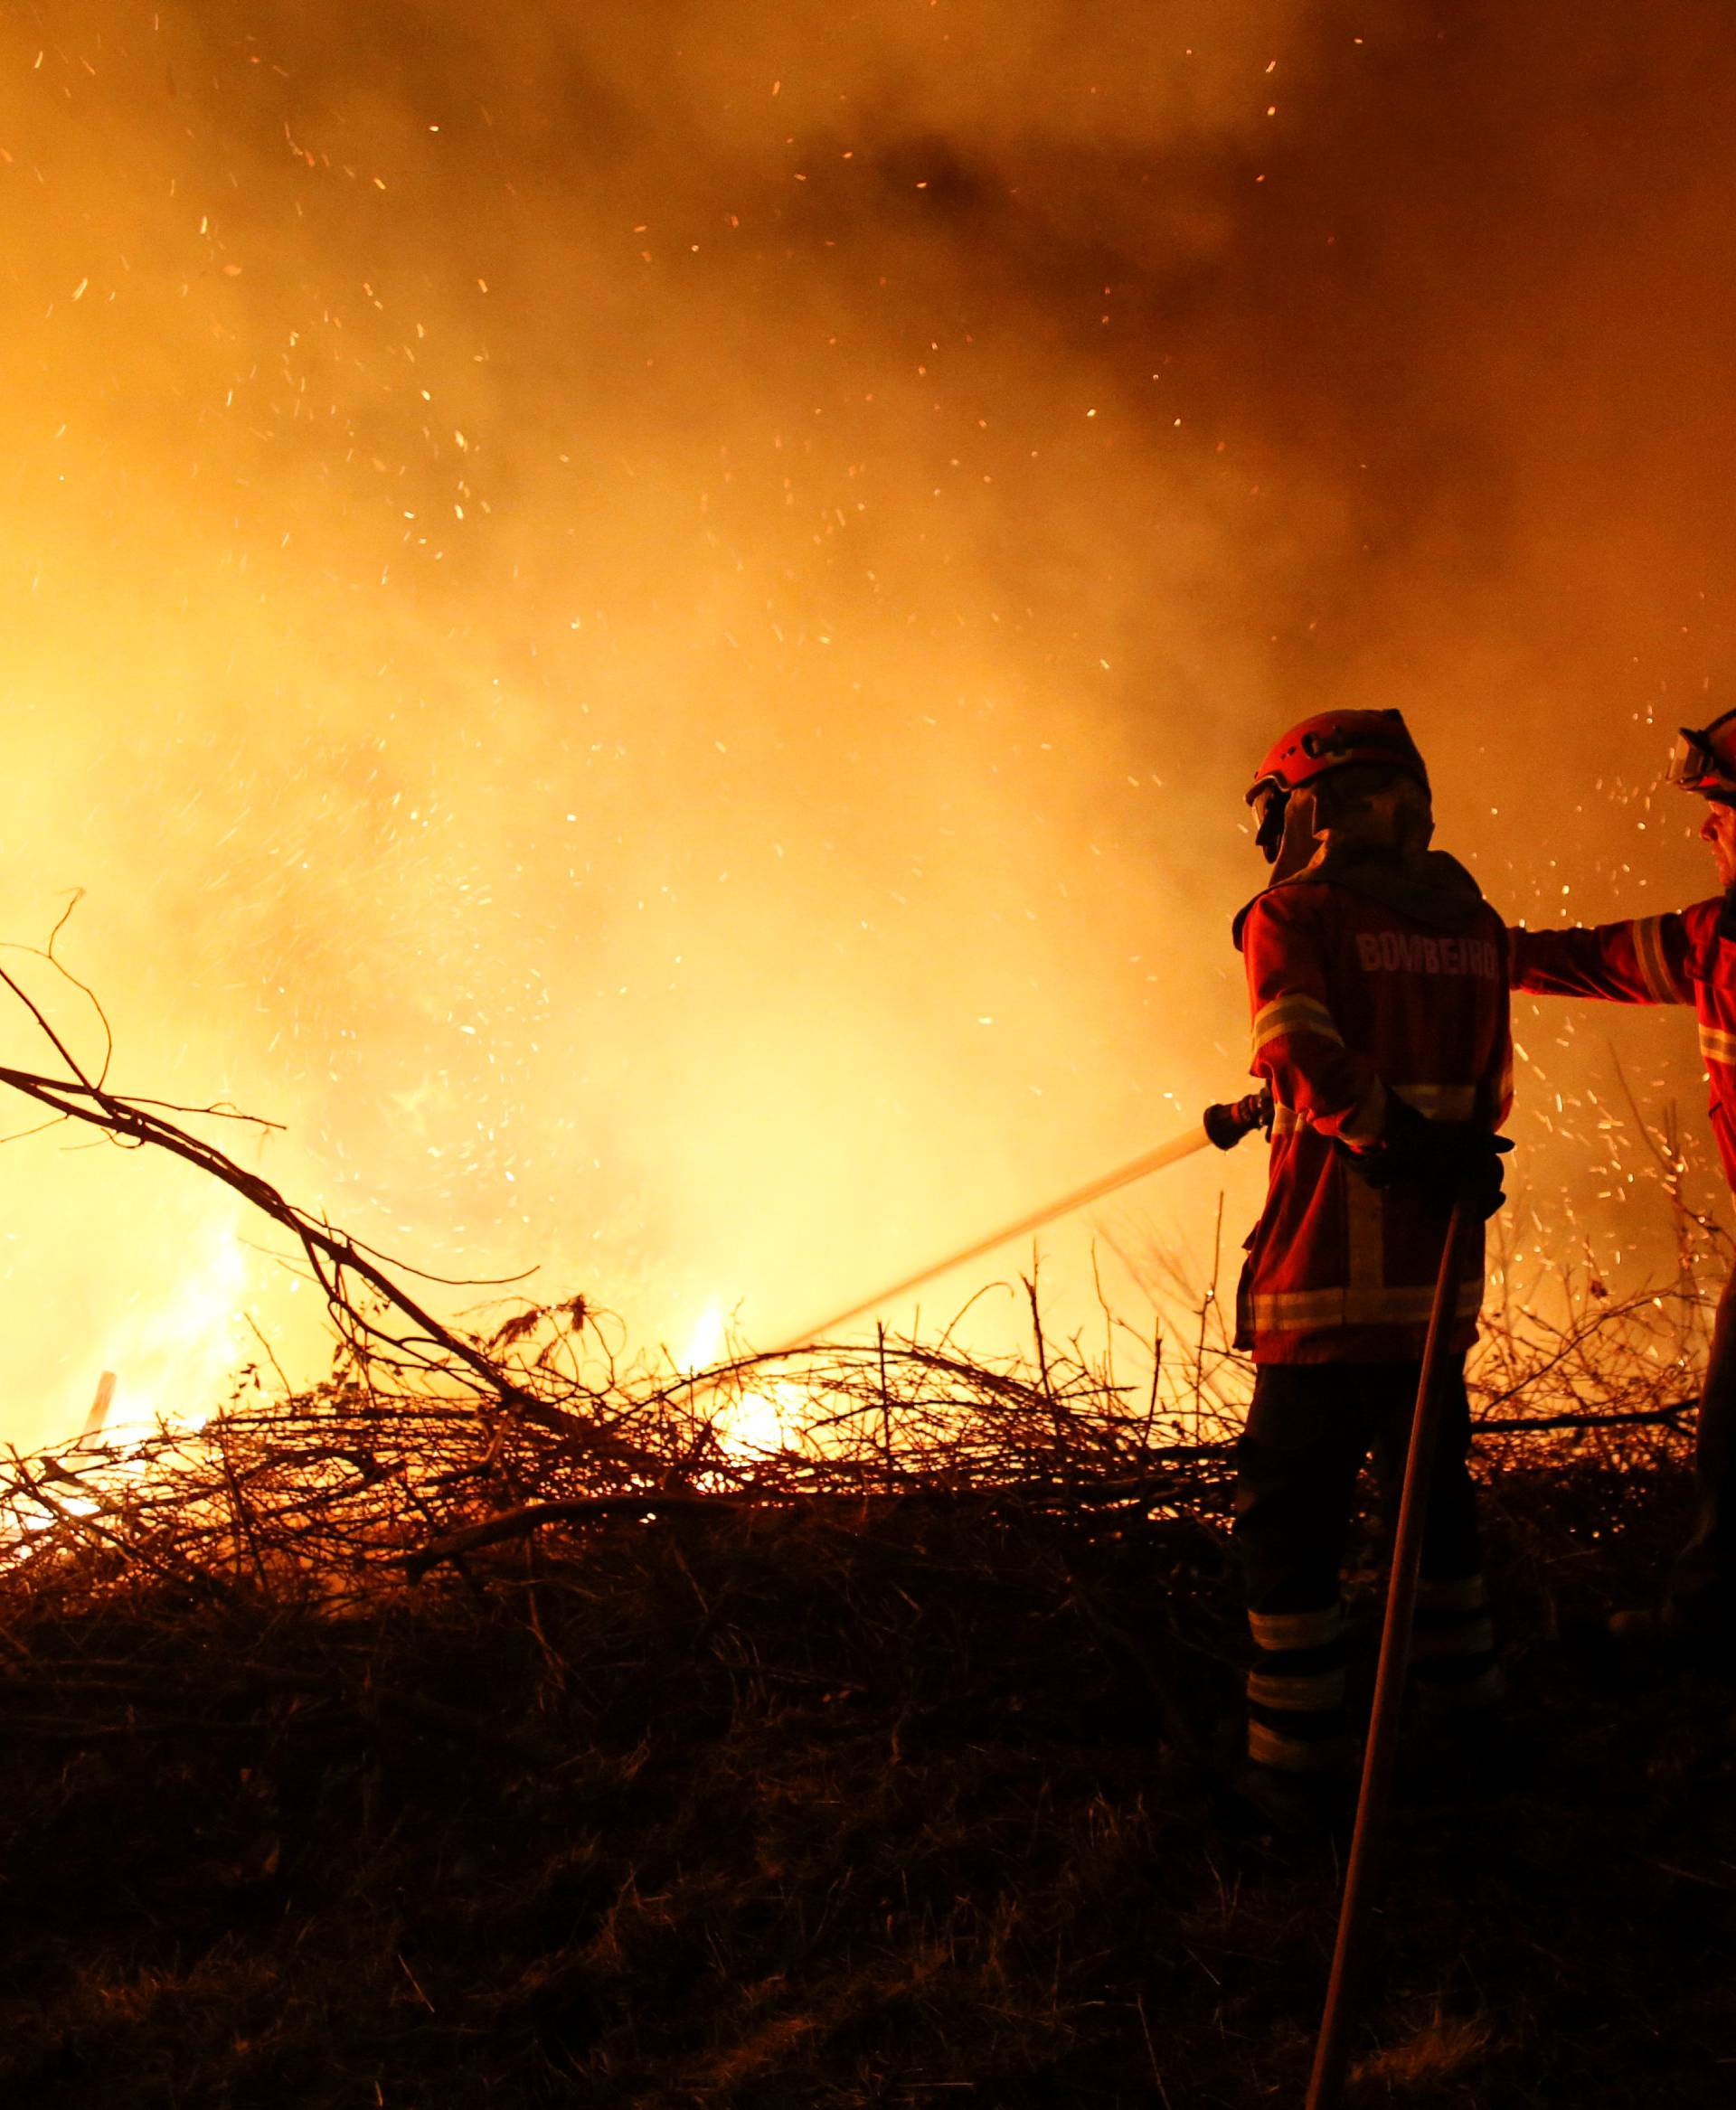 Firefighters try to extinguish flames from a forest fire in Cabanoes near Lousa